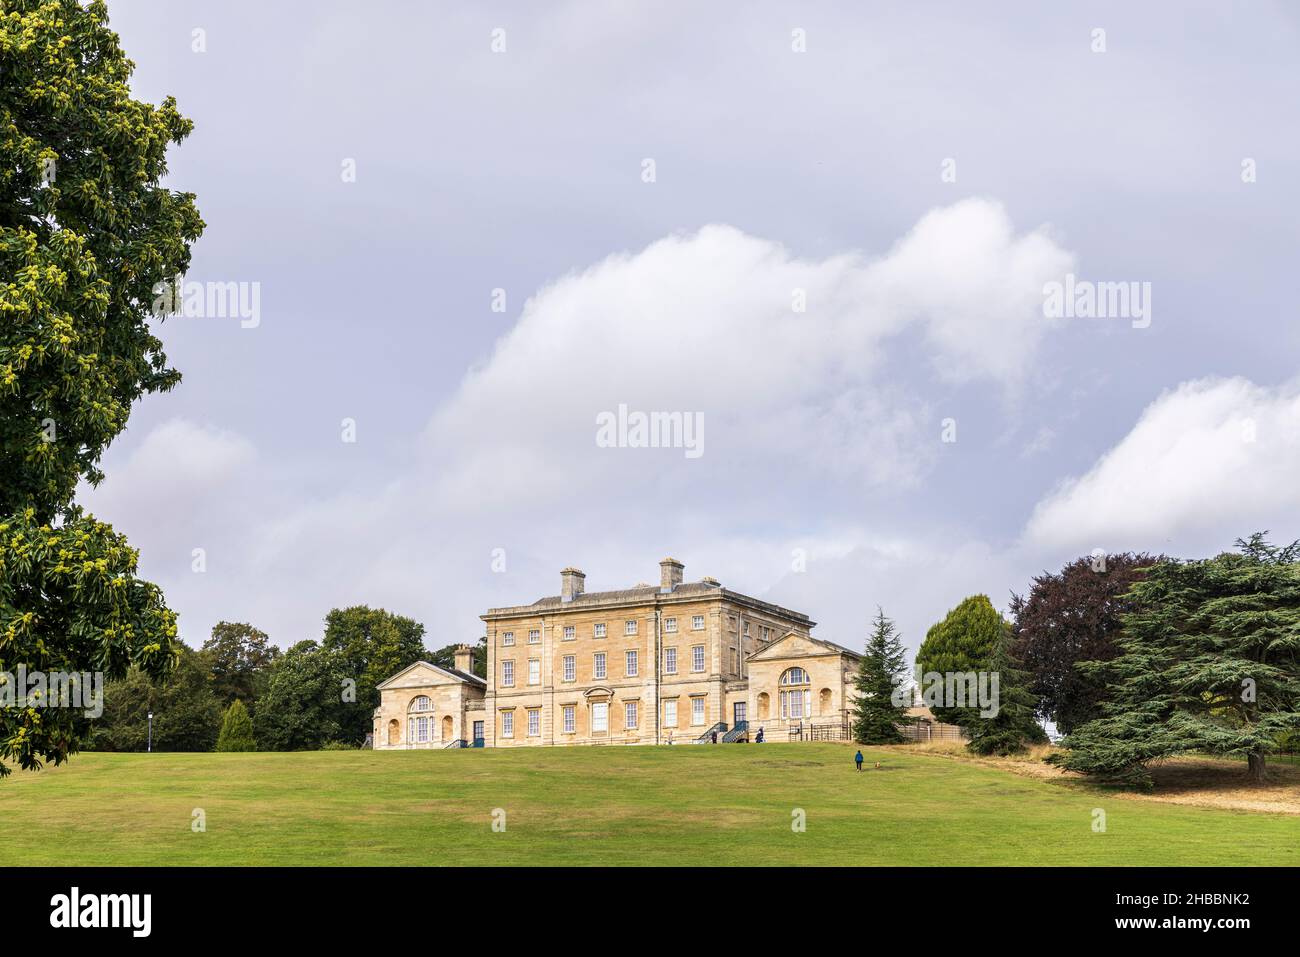 Cusworth Hall, with swans in the lake. Musuem, old manor house and parkland in Doncaster, Yorkshire, England Stock Photo